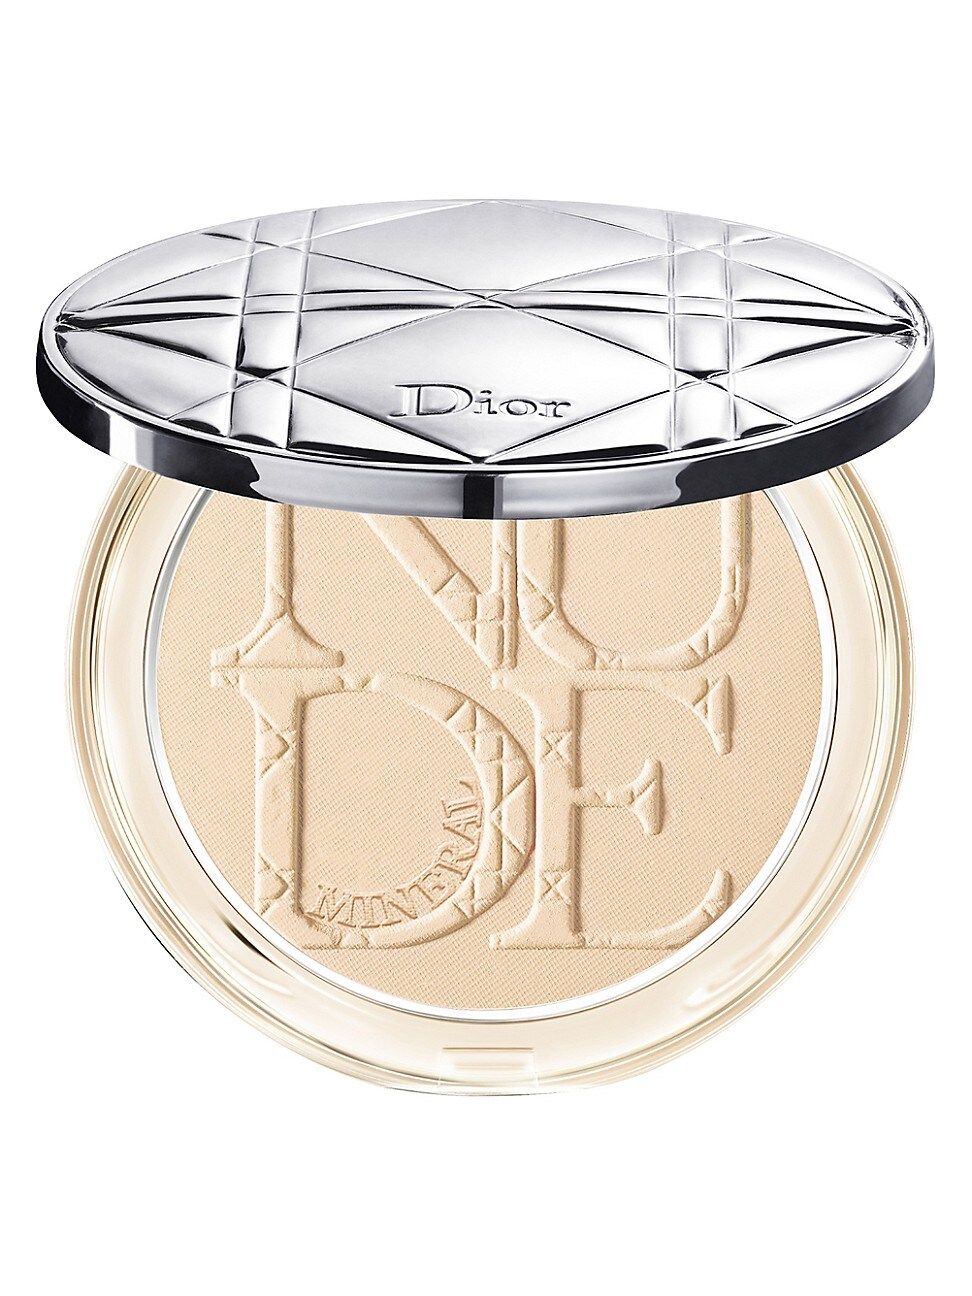 Dior Women's Diorskin Mineral Nude Natural Matte Perfecting Powder - Nude | Saks Fifth Avenue